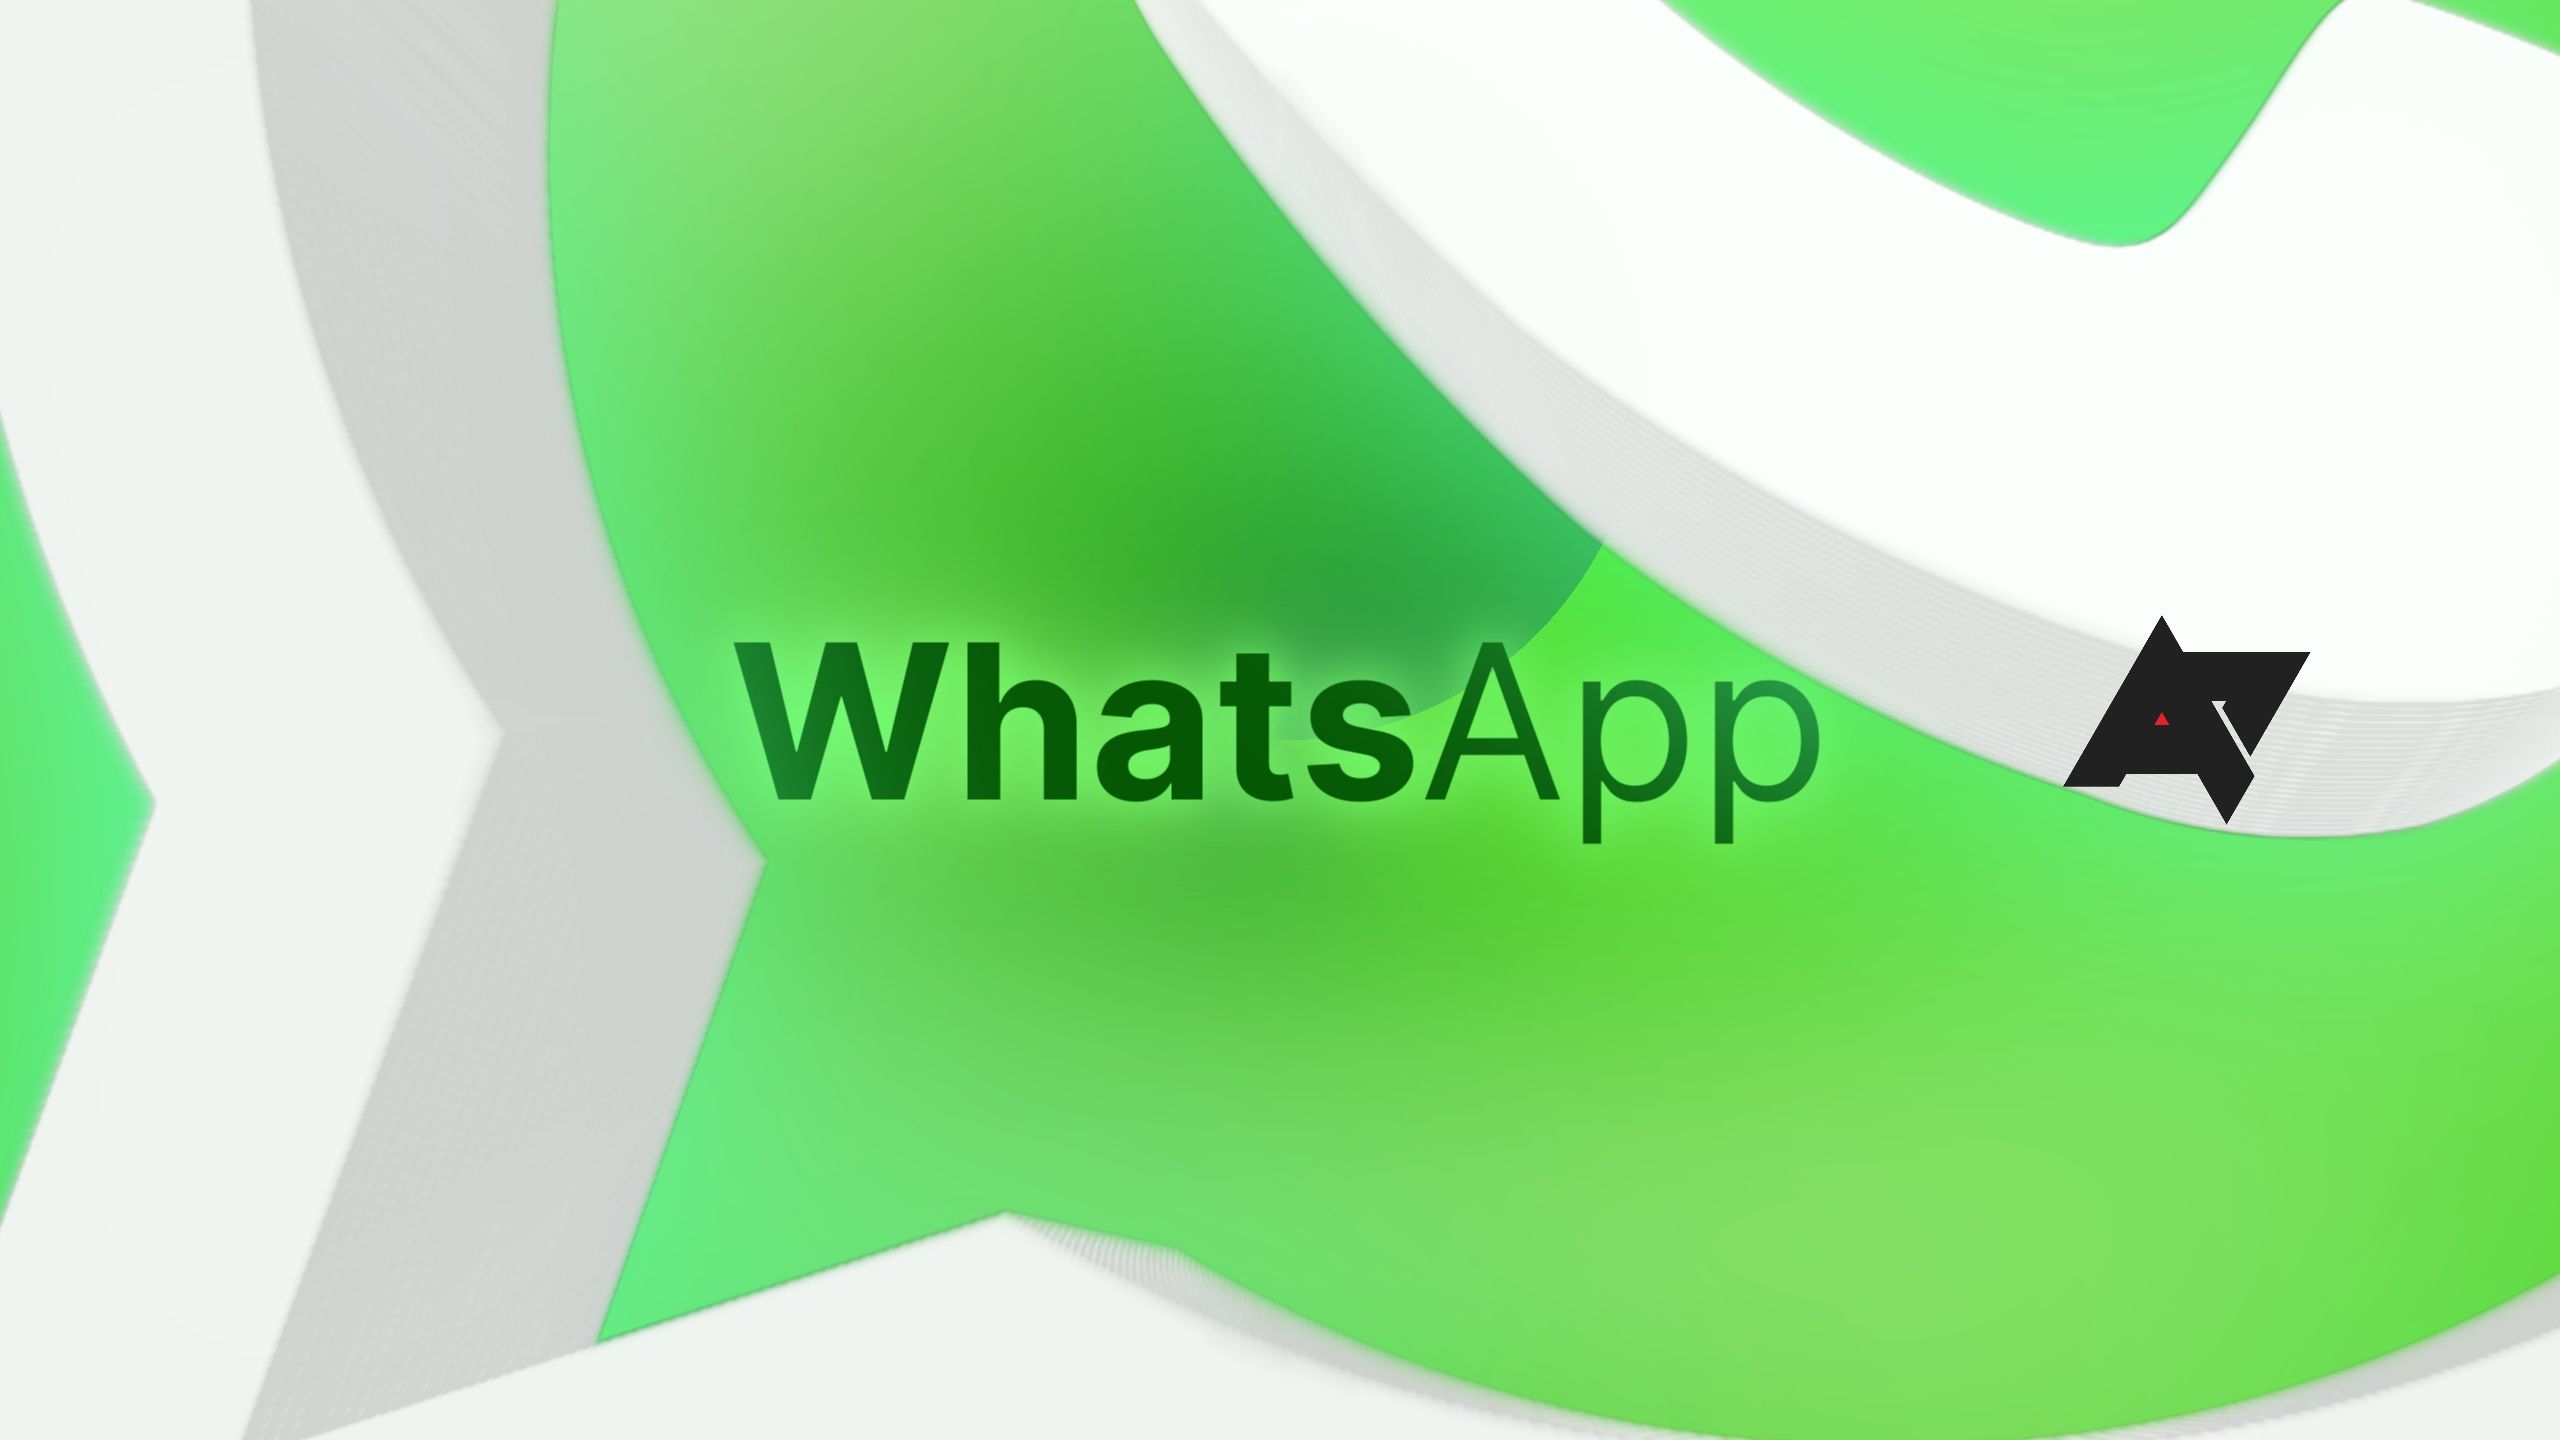 WhatsApp Rolls Out Privacy Features, Bottom Navigation Bar With New UI to  Beta Testers: Details, new bottom 